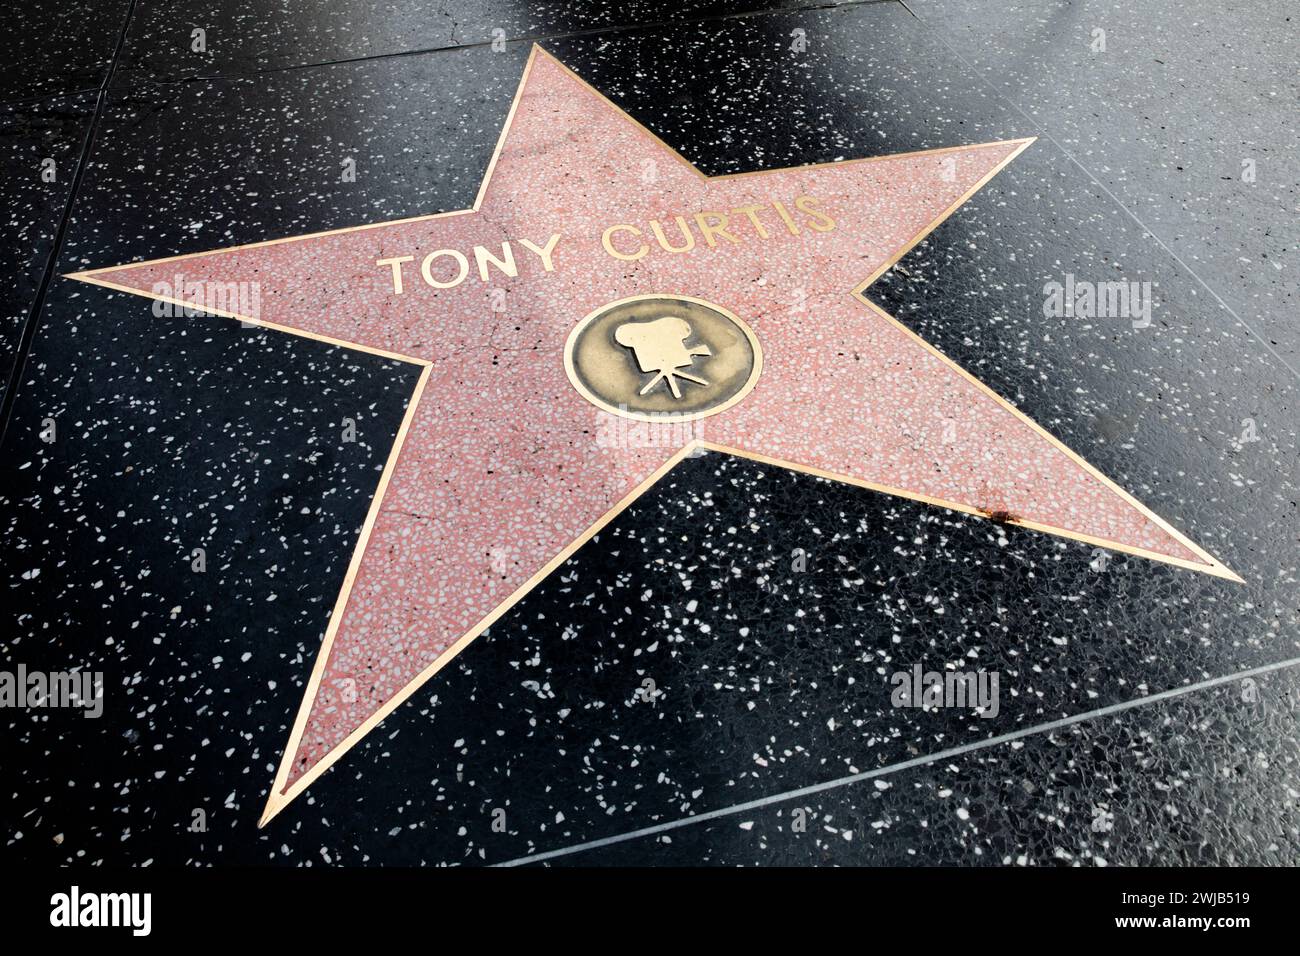 Tony Curtis's star on the Hollywood Walk of Fame, California, USA Stock Photo